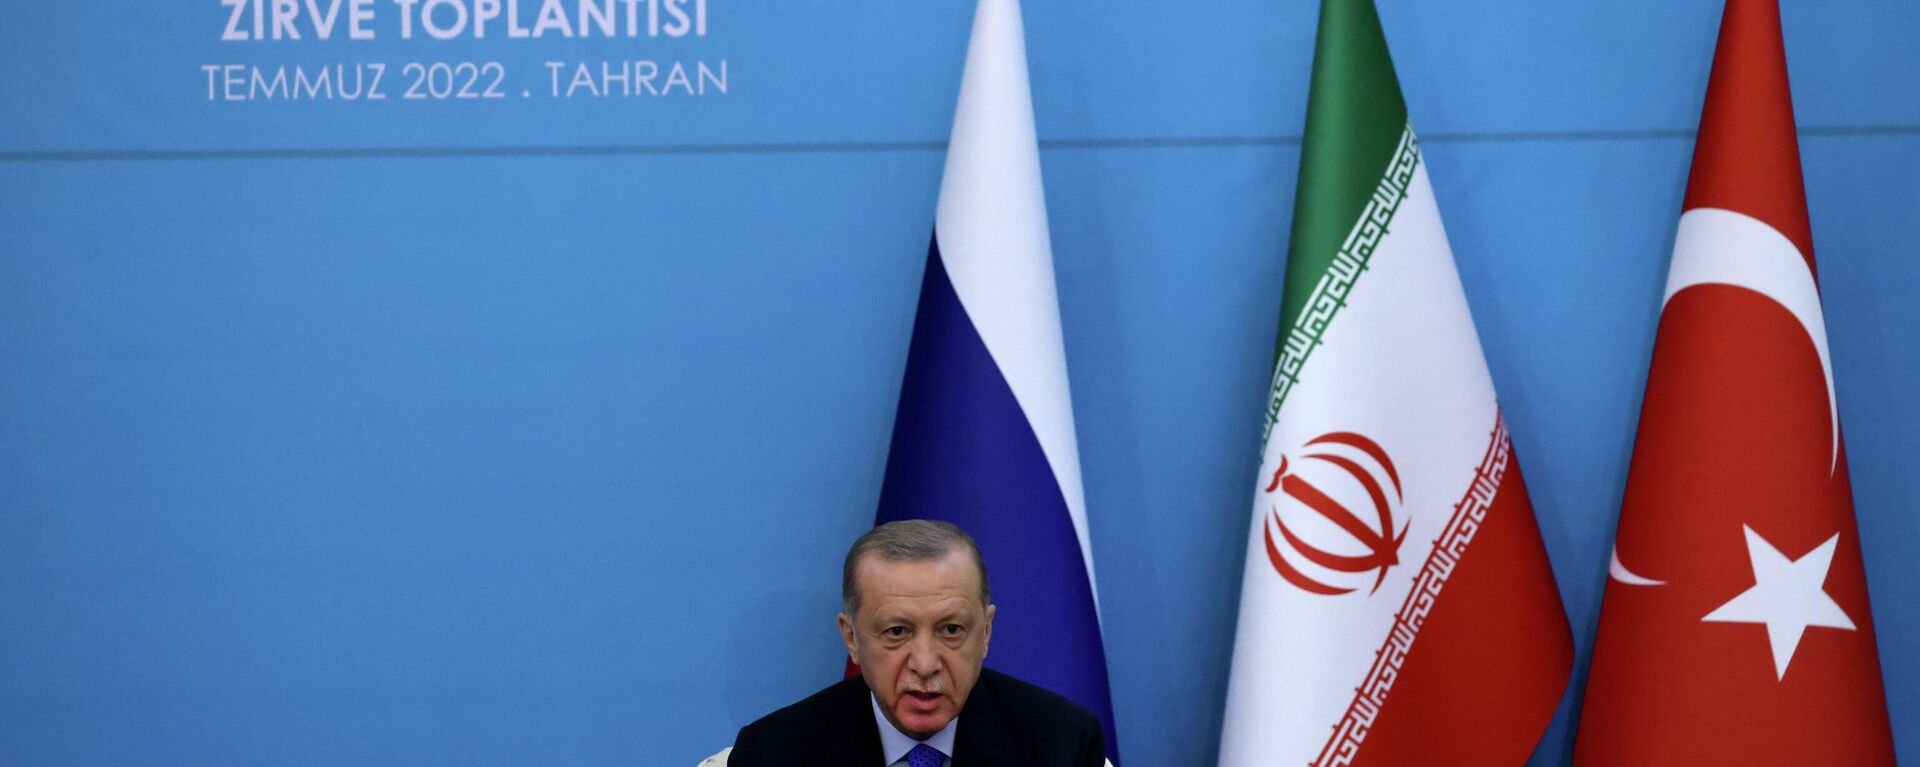 Turkish President Recep Tayyip Erdogan speaks during a joint press conference with his Iranian and Russian counterparts following their summit in Tehran on July 19, 2022. - Sputnik International, 1920, 20.07.2022